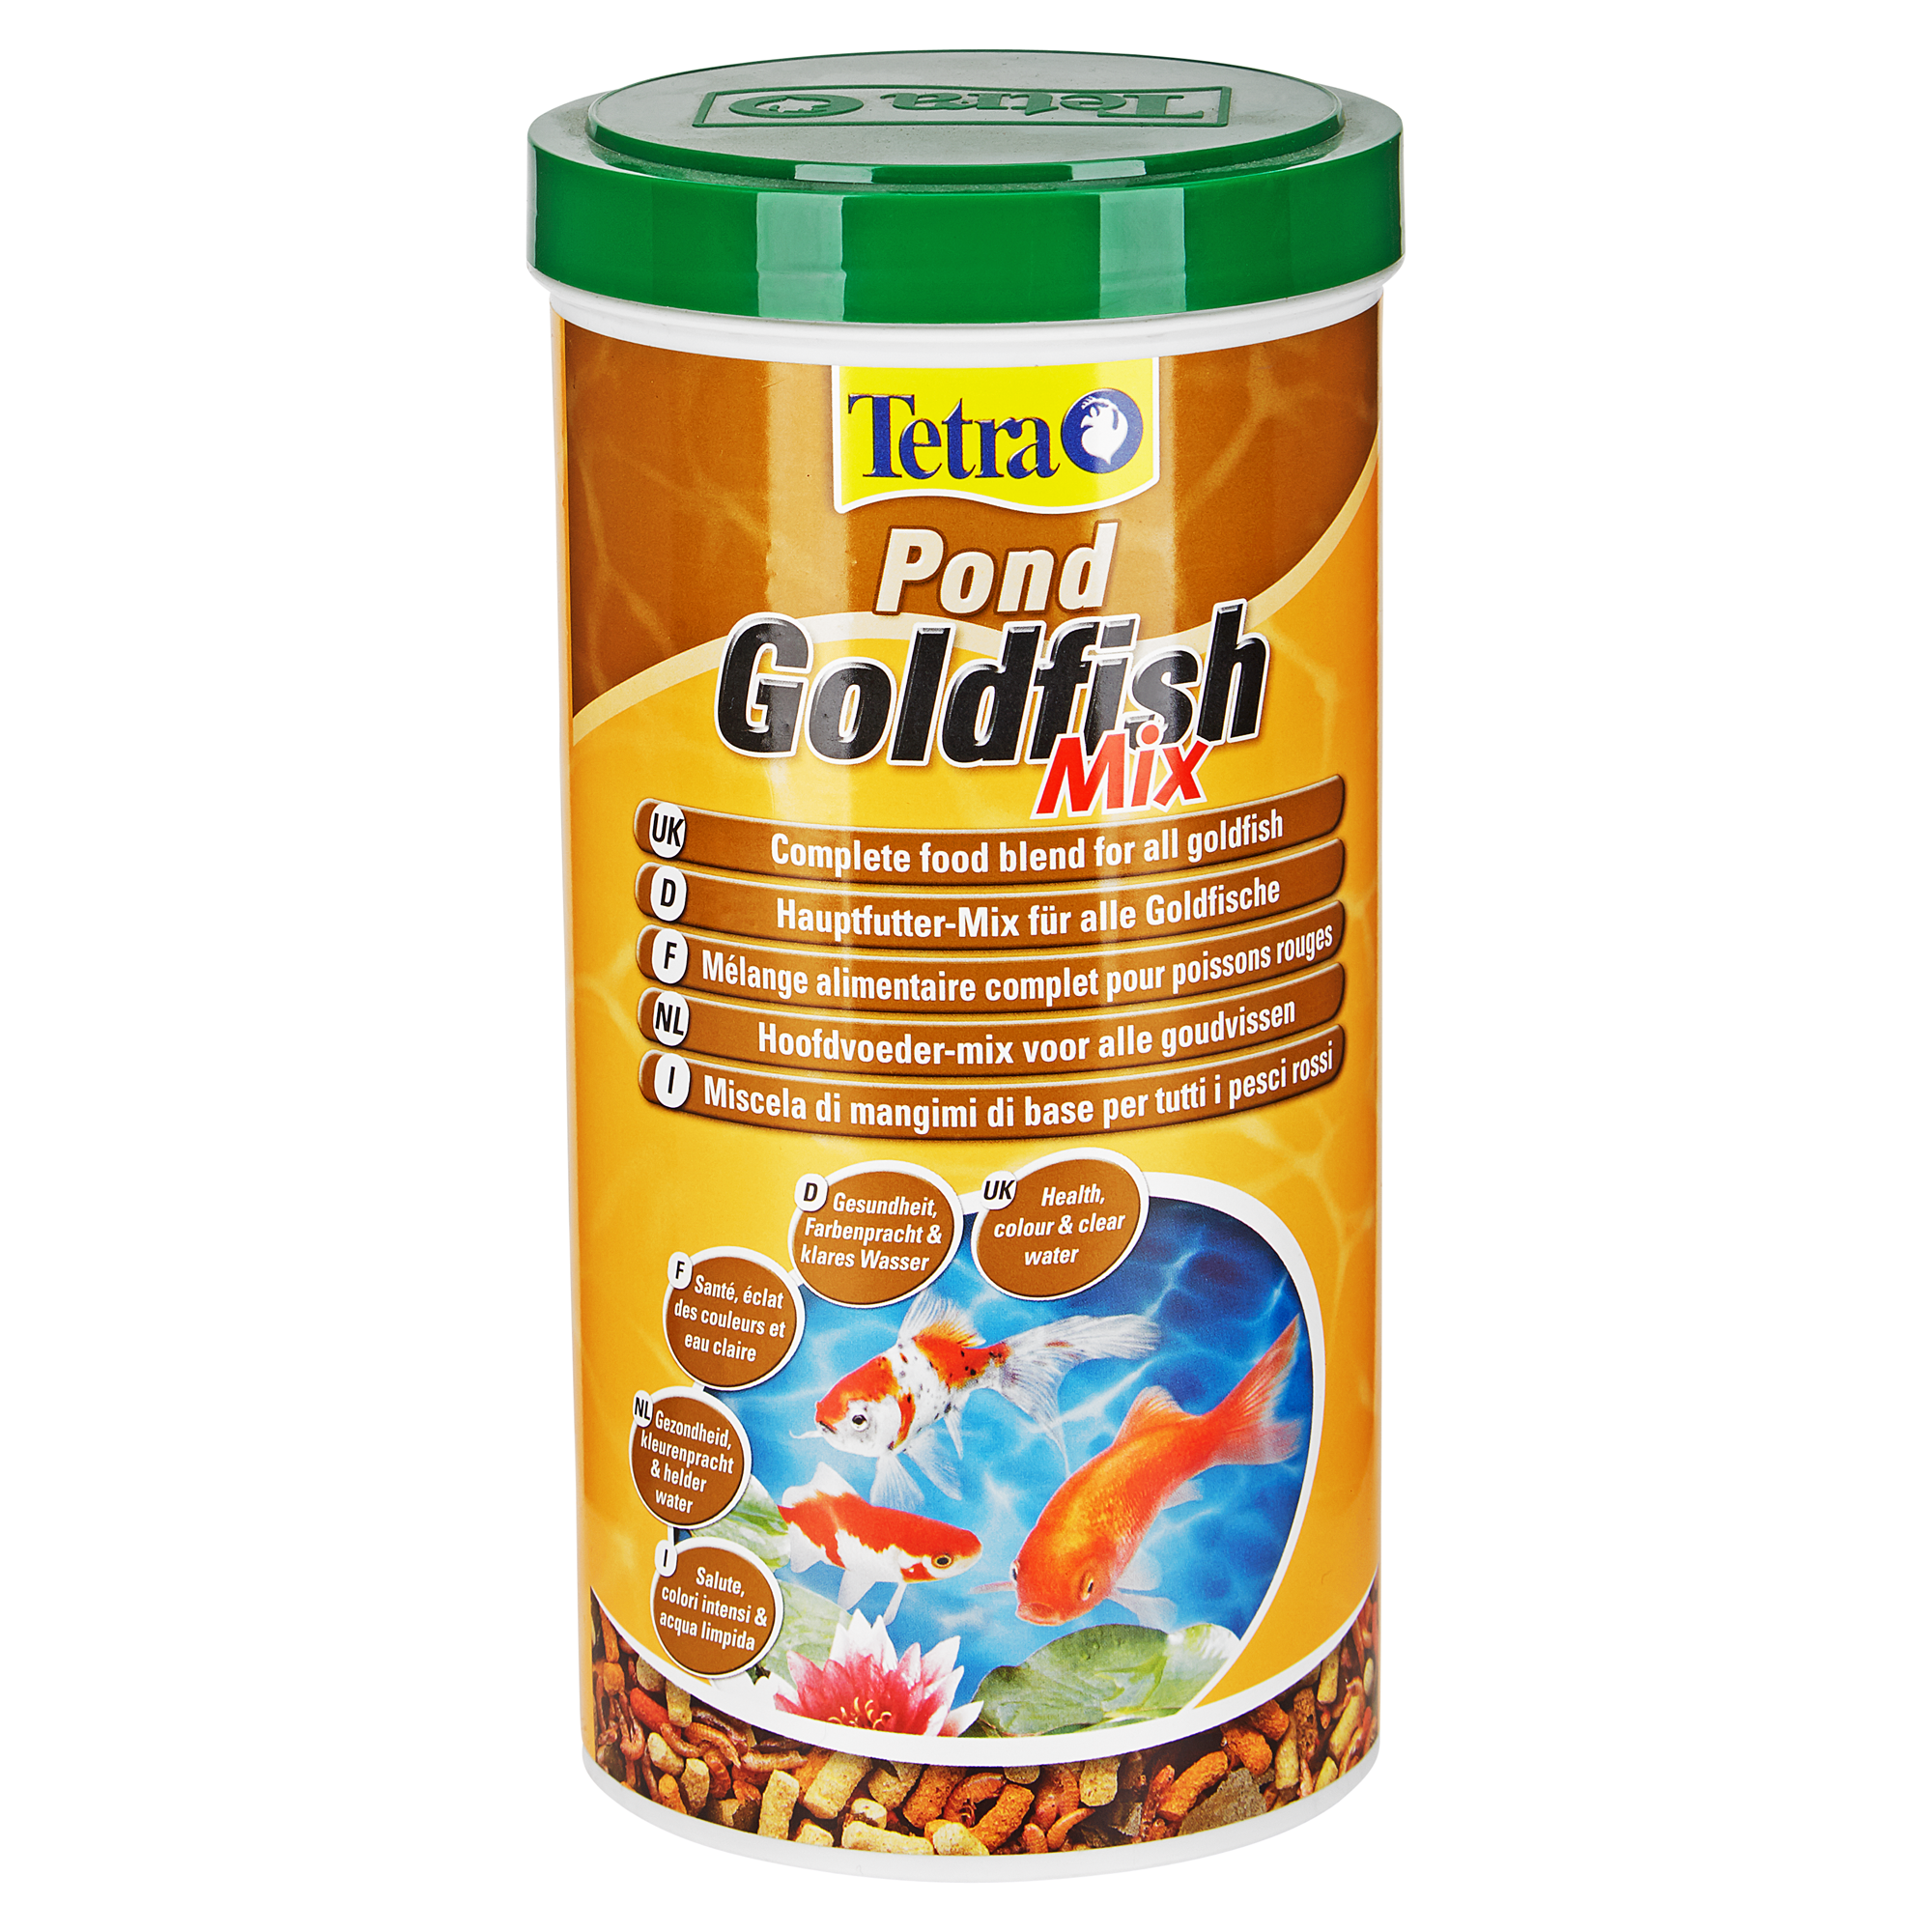 Fischfutter "Pond" Goldfish Mix 0,14 kg + product picture